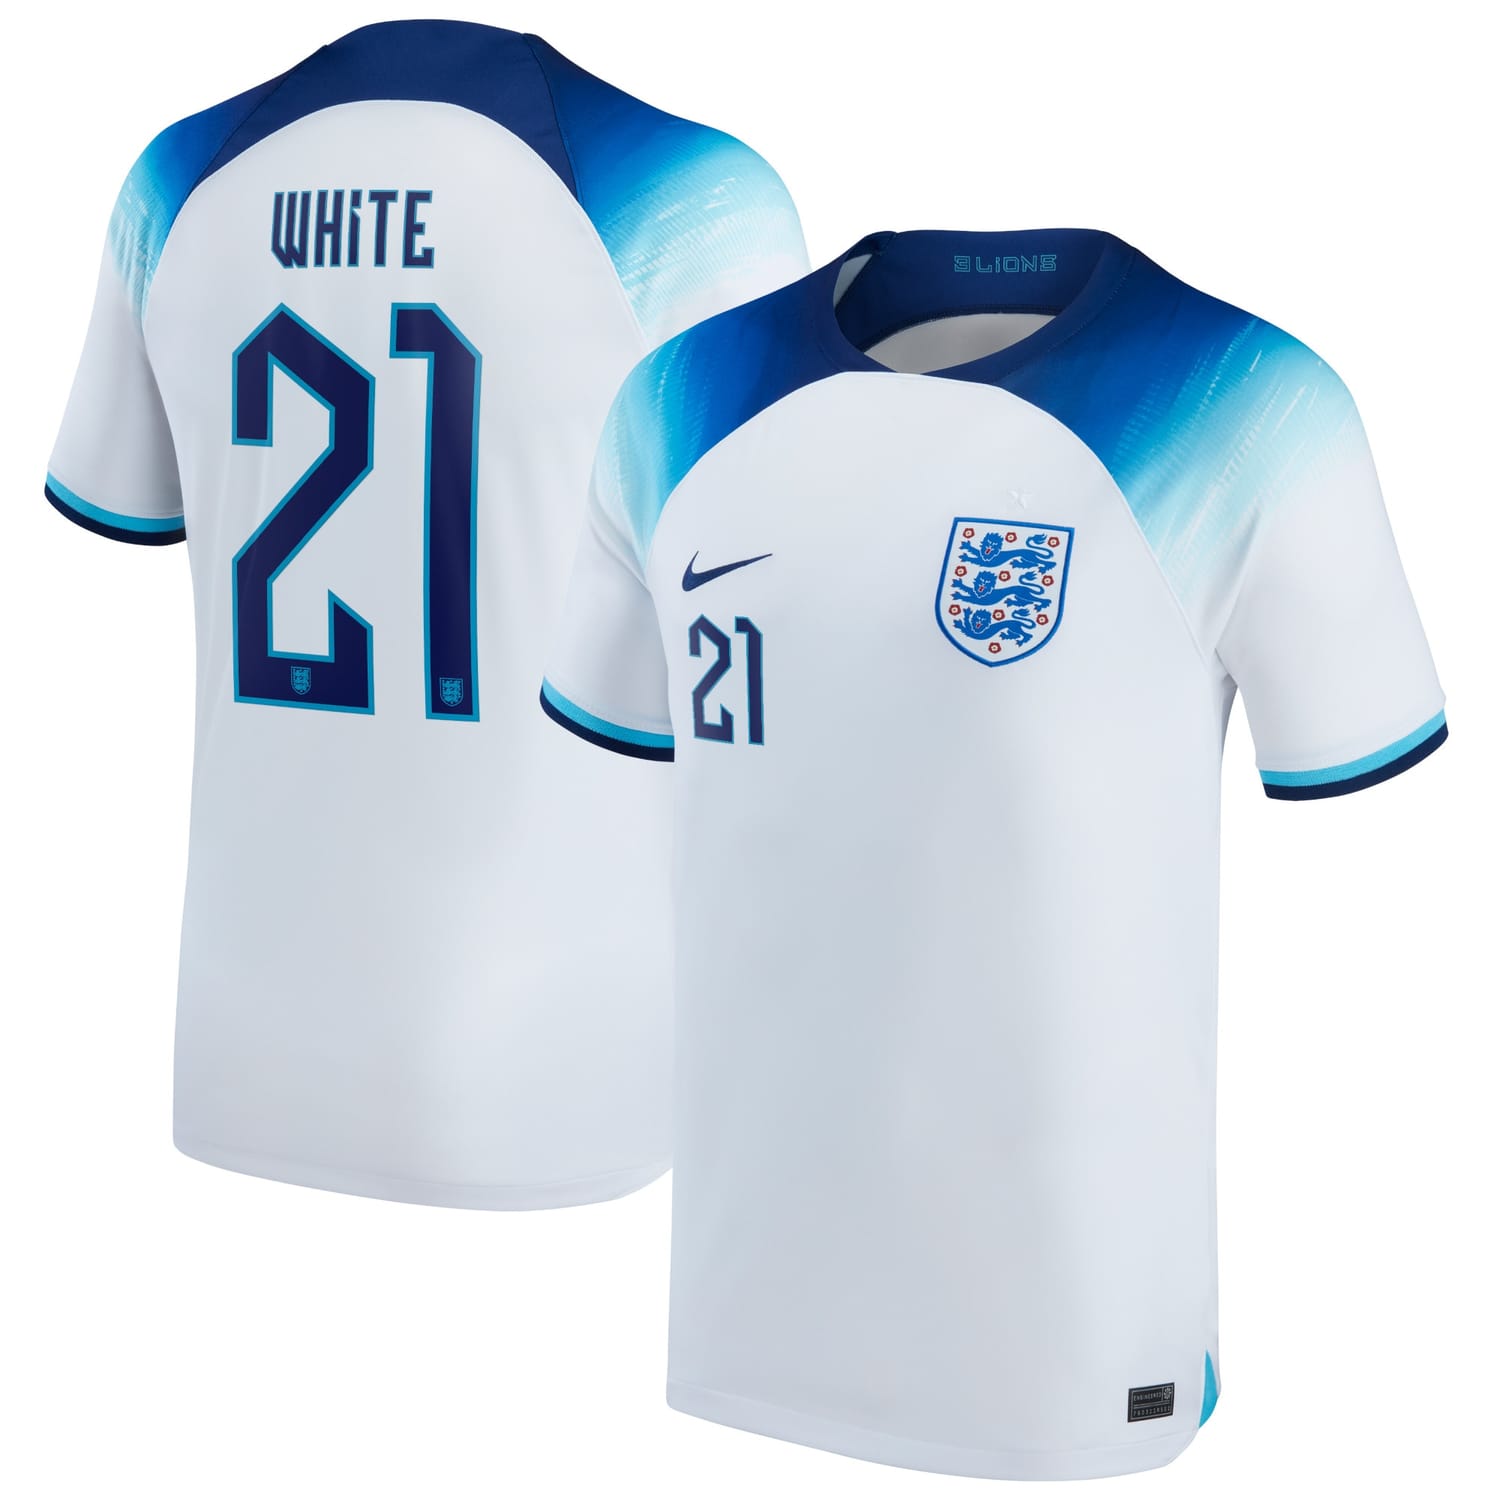 England National Team Home Jersey Shirt White 2022 player Ben White 21 printing for Men